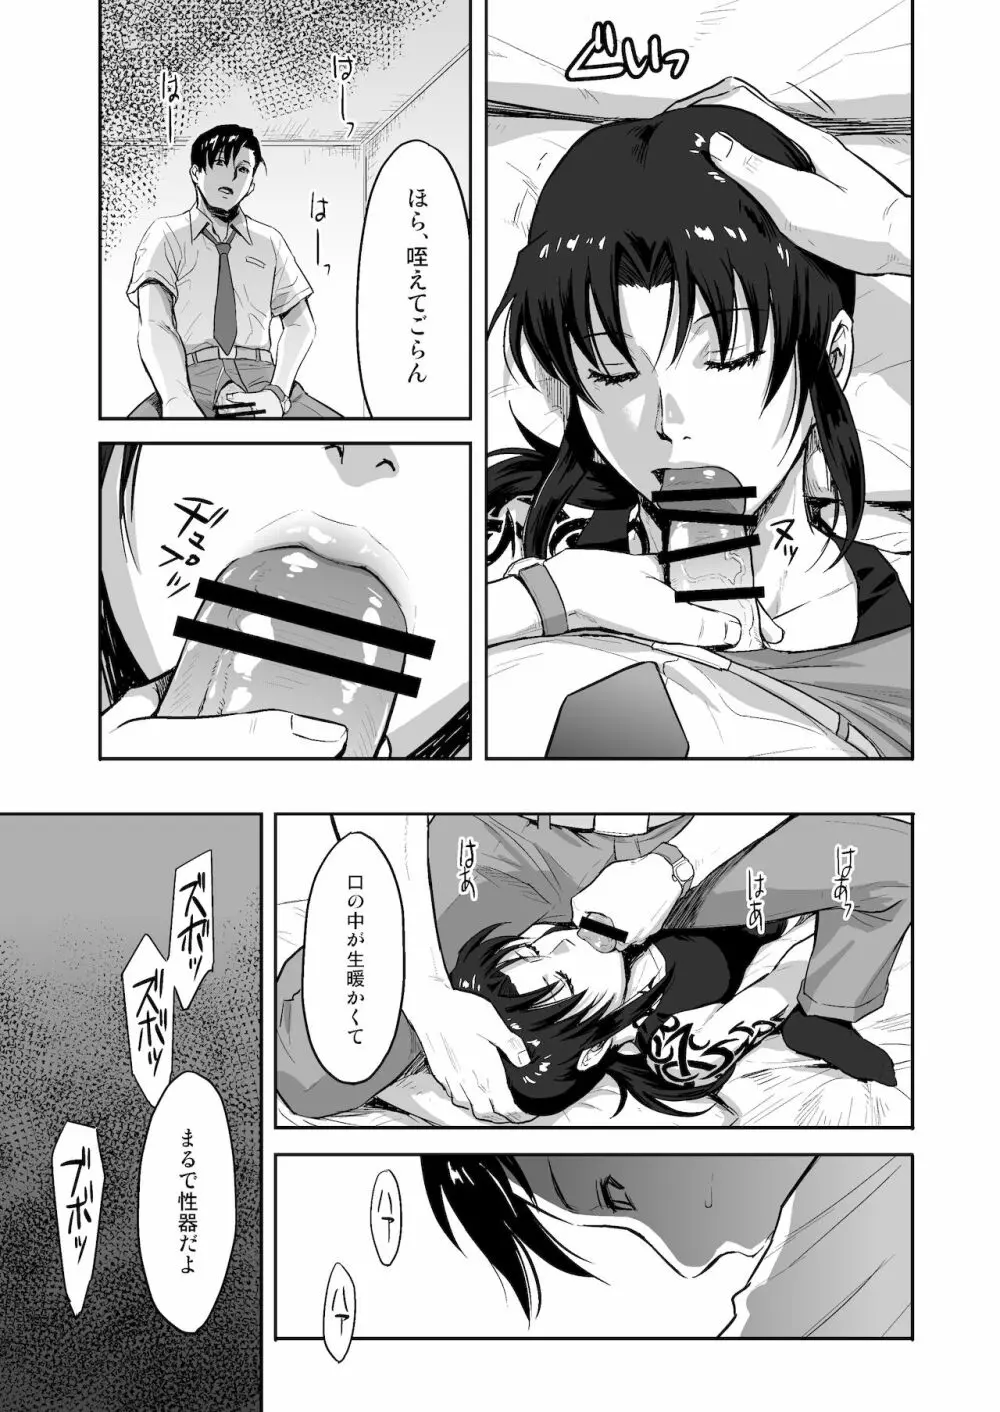 SLEEPING Revy - page8